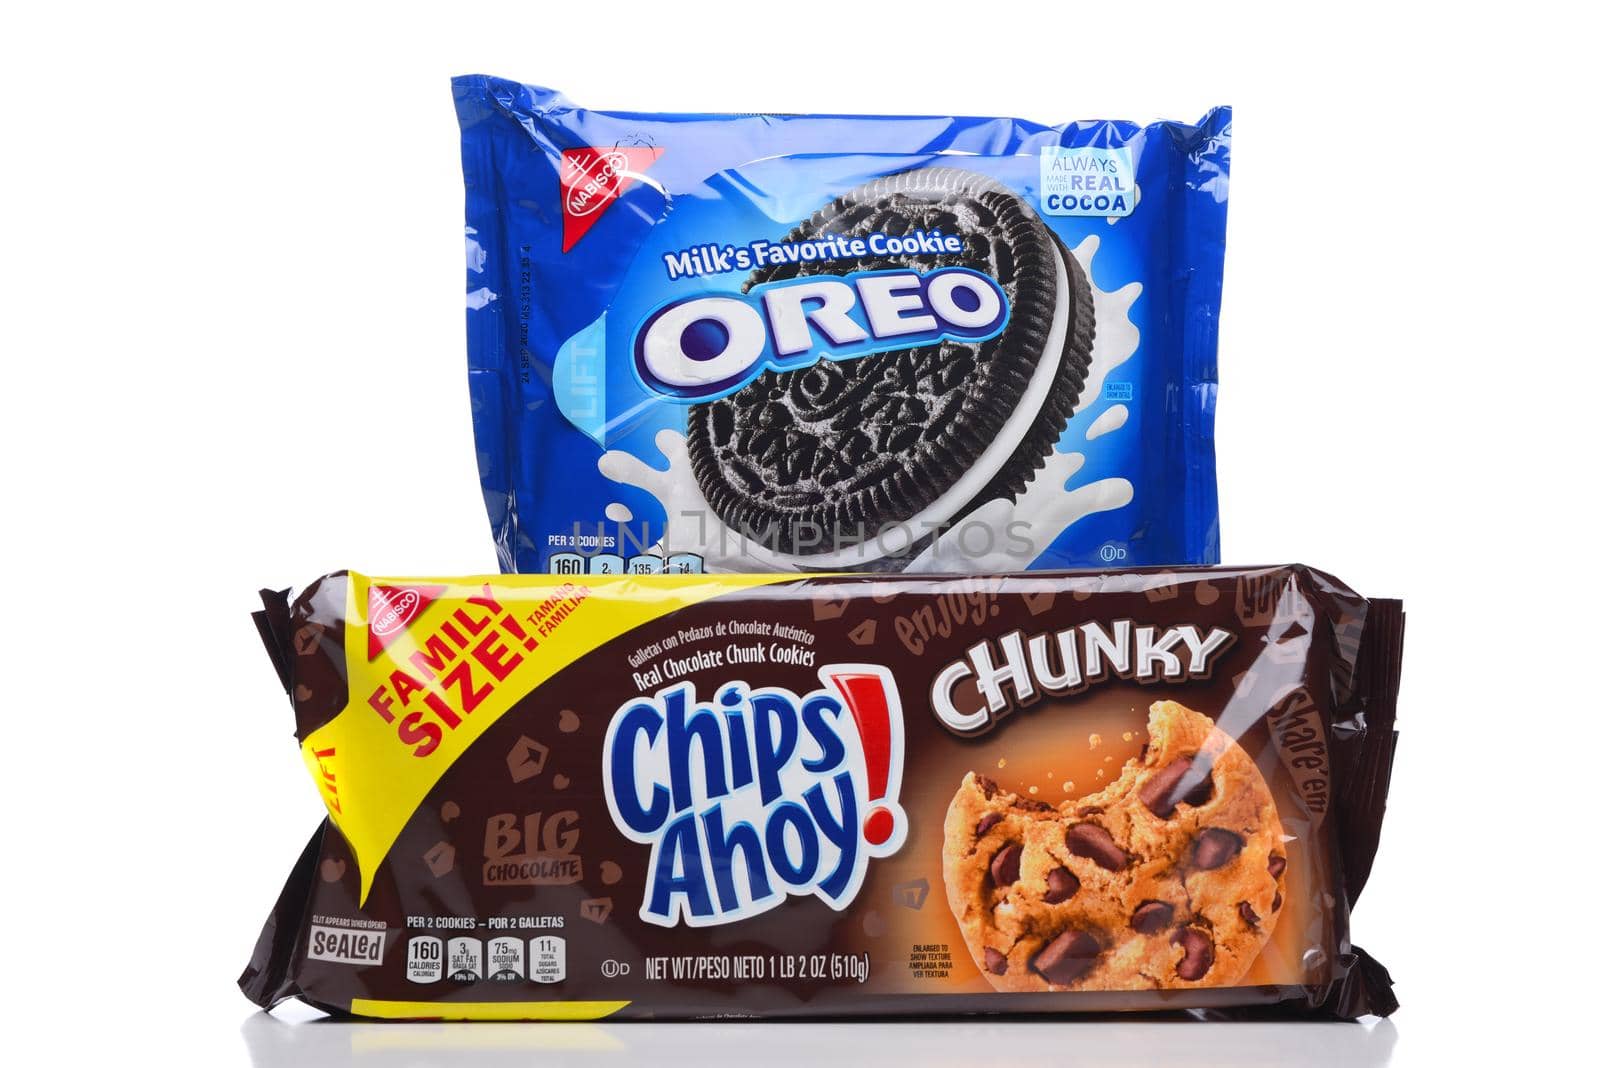 IRVINE, CALIFORNIA - 16 MAY 2020: A package of Nabisco Oreo Cookies and Chunky Chips Ahoy. 